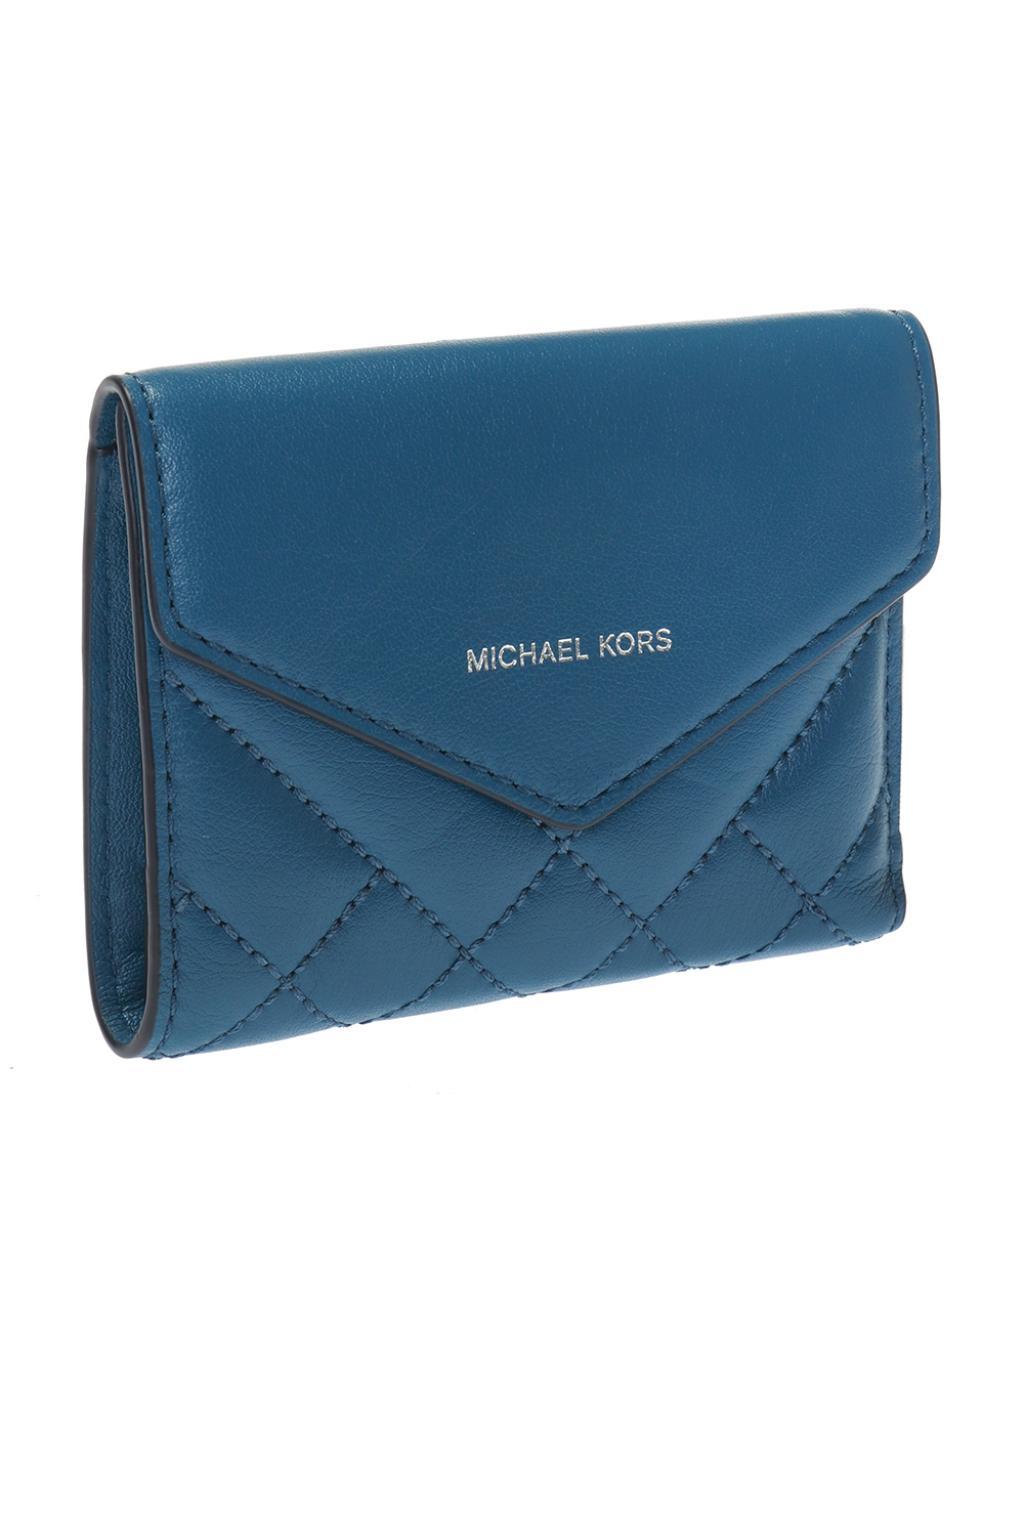 Michael Kors Leather Quilted Wallet With Logo in dk Chambray (Blue) - Lyst